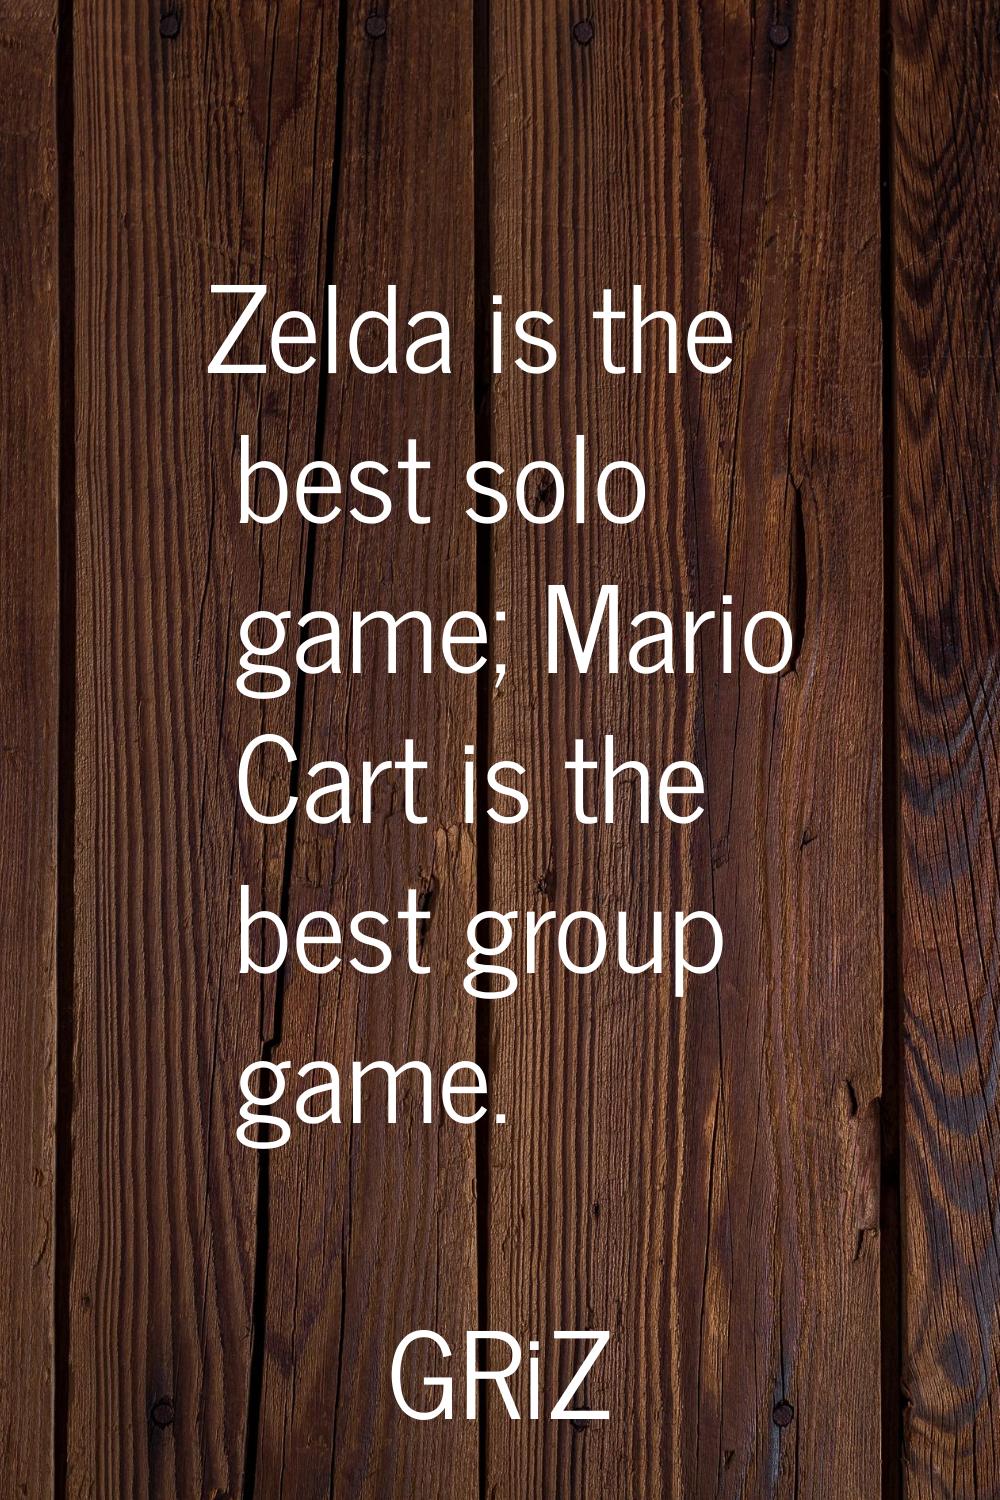 Zelda is the best solo game; Mario Cart is the best group game.